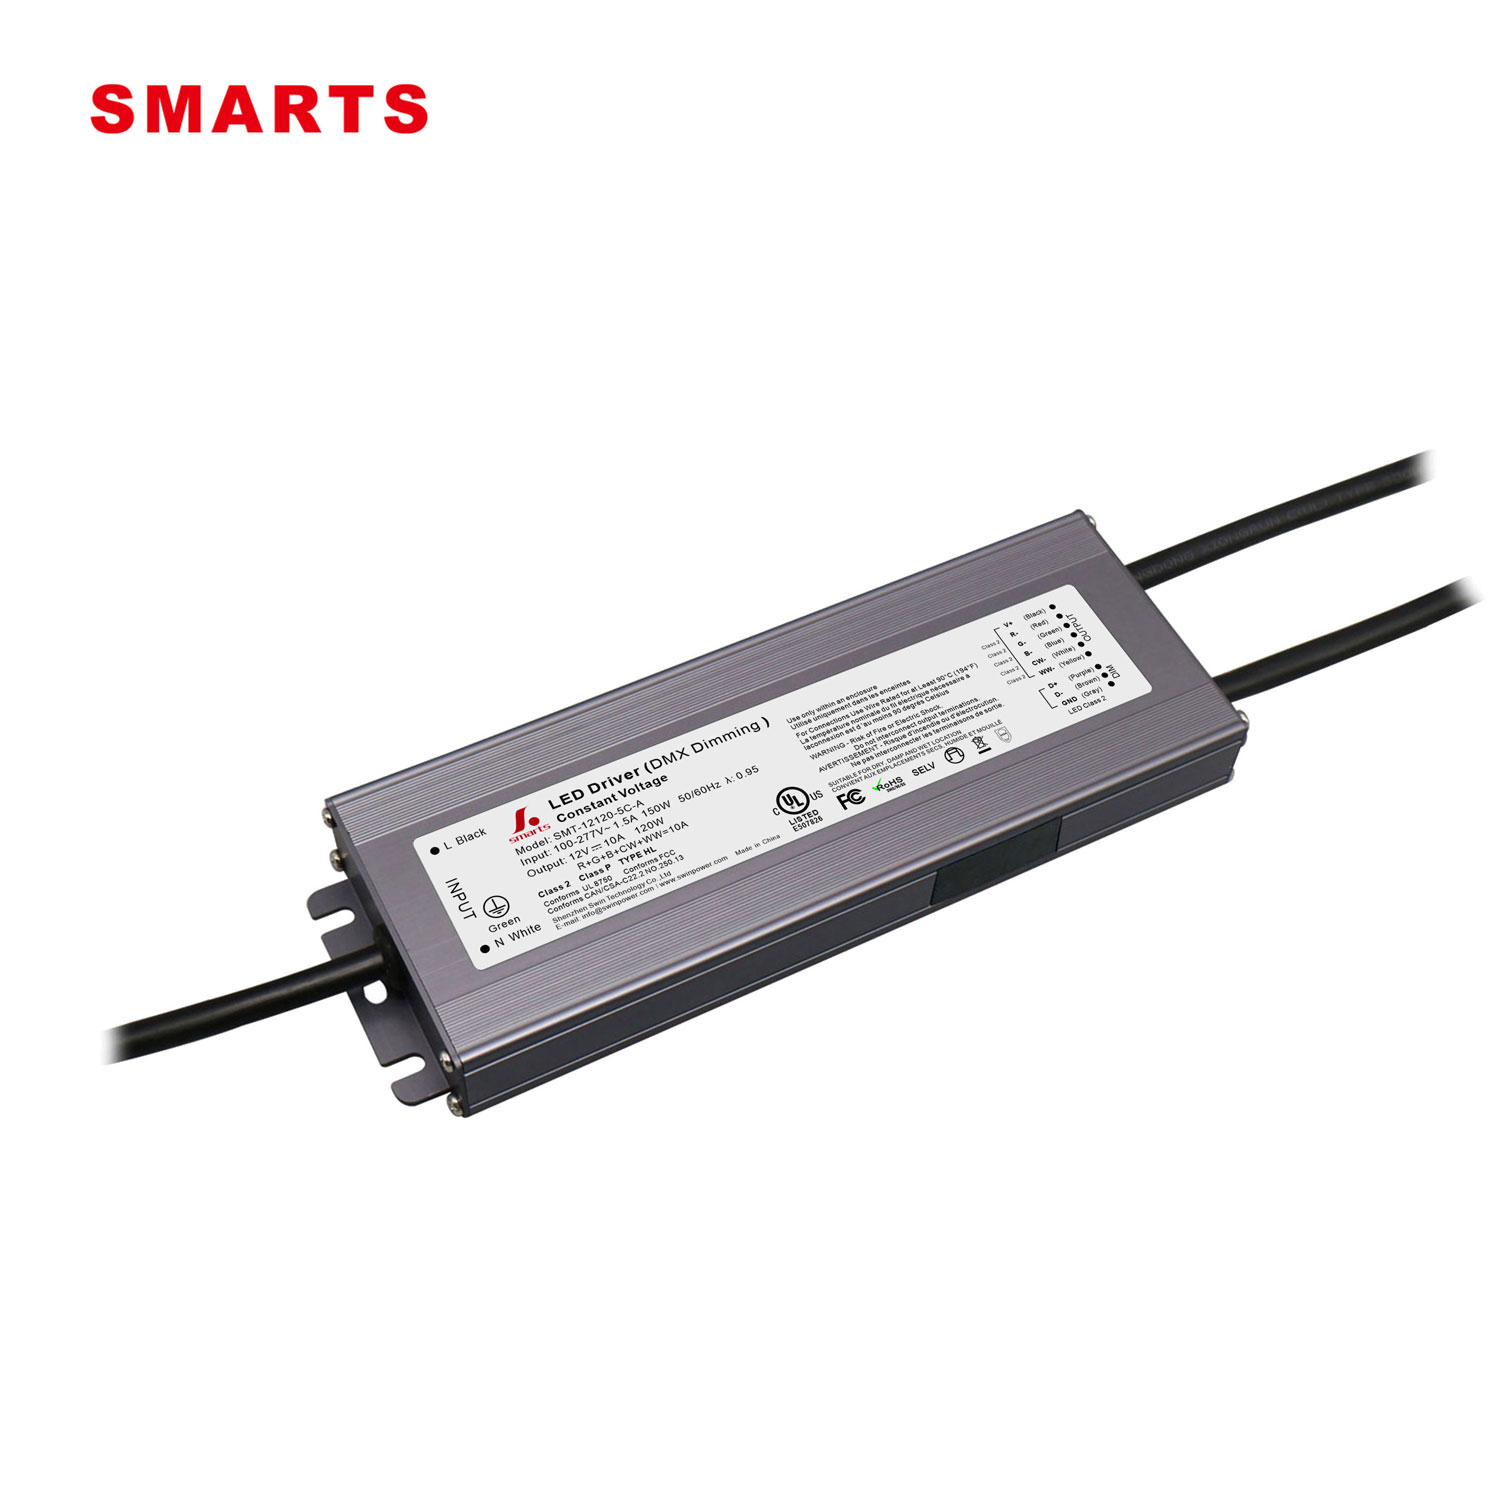 120W DMX Dimmable LED Driver